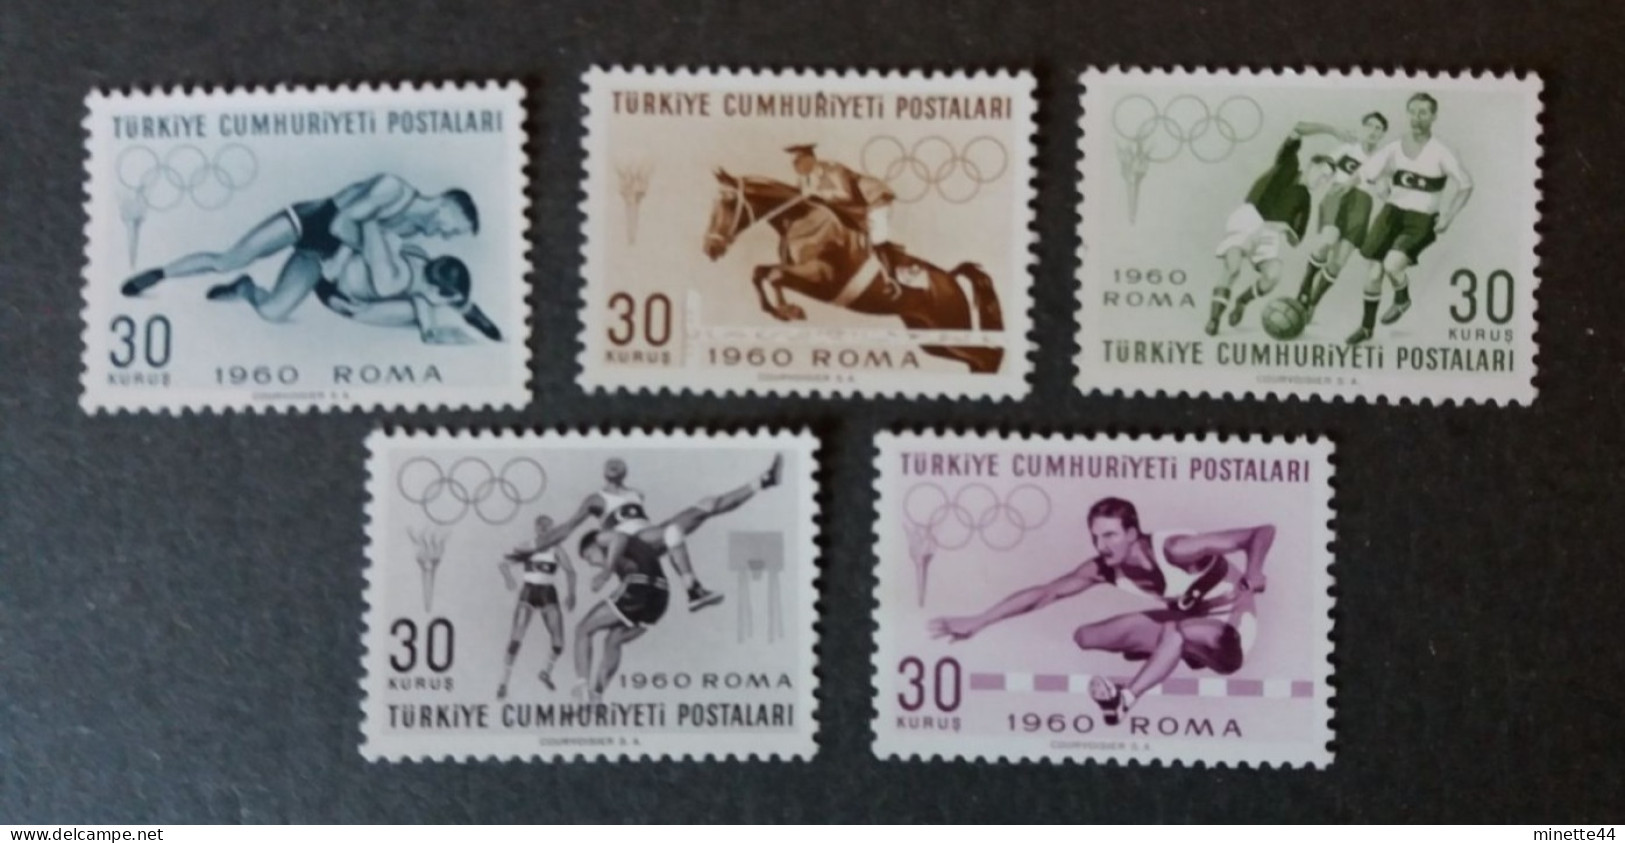 TURQUIE TURKEY 1960 MNH**  GAMES JEUX LUTTE JUMPING ATHLETISME  BASKET FOOTBALL SPORTS - Summer 1960: Rome